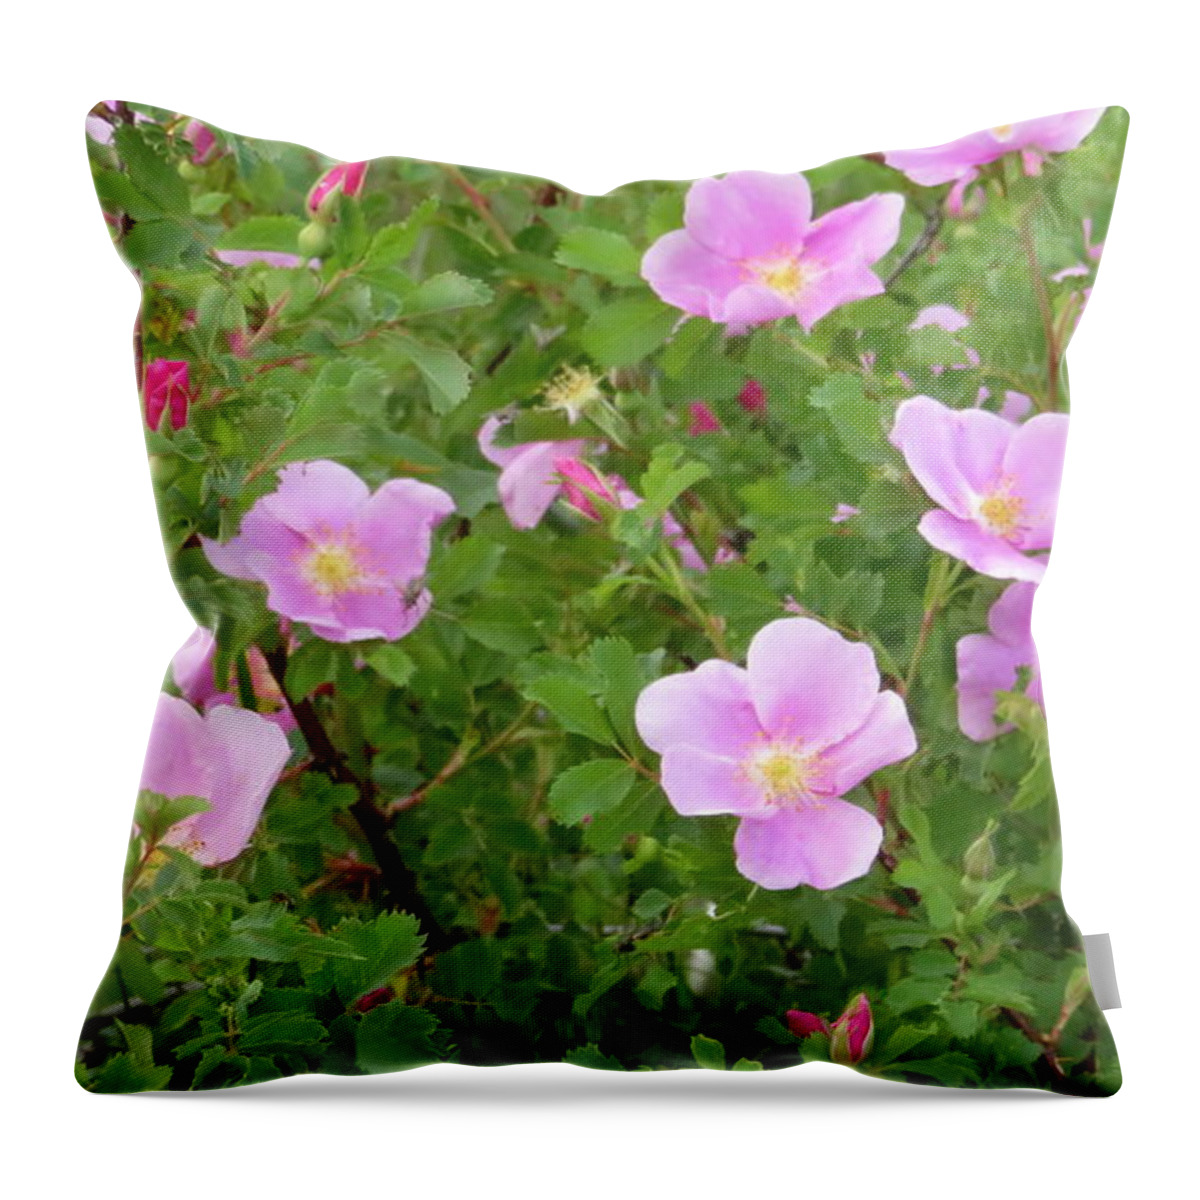 Rose Throw Pillow featuring the photograph Prairie Roses by Katie Keenan